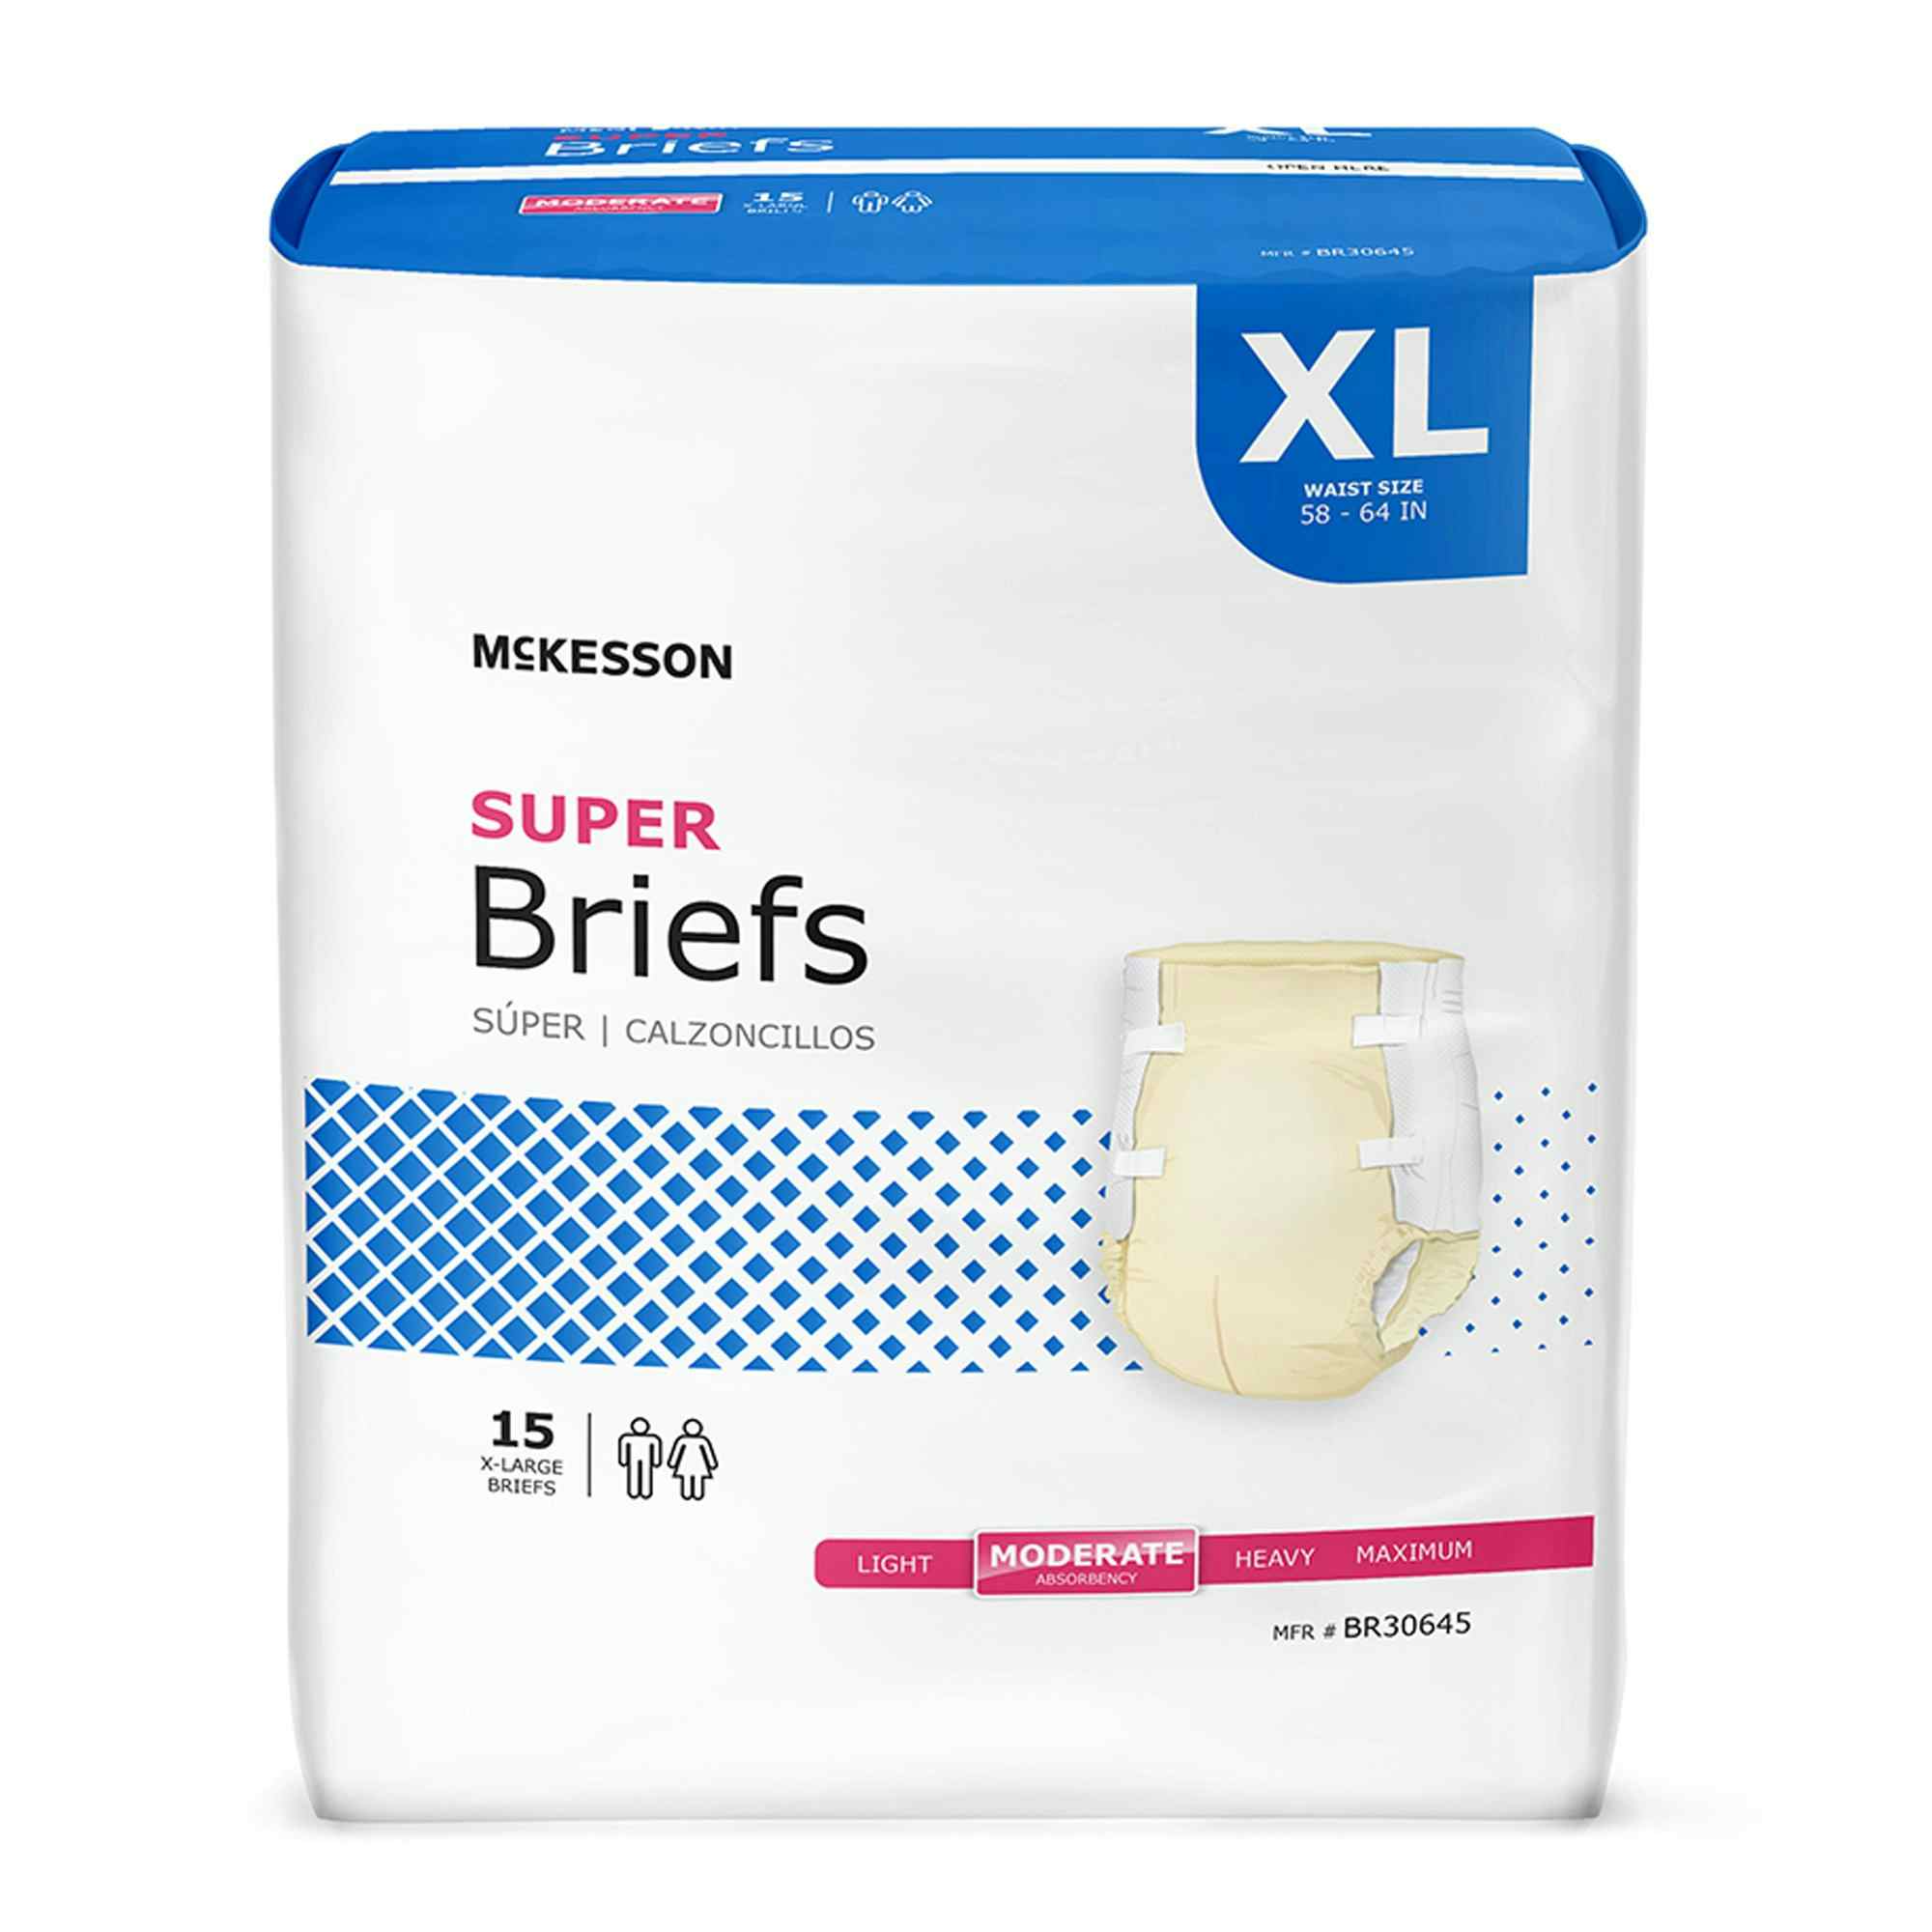 McKesson Super Brief Adult Diapers with Tabs, Moderate Absorbency, BR30645, Beige - X-Large (58-64") - Case of 60 (4 Bags)